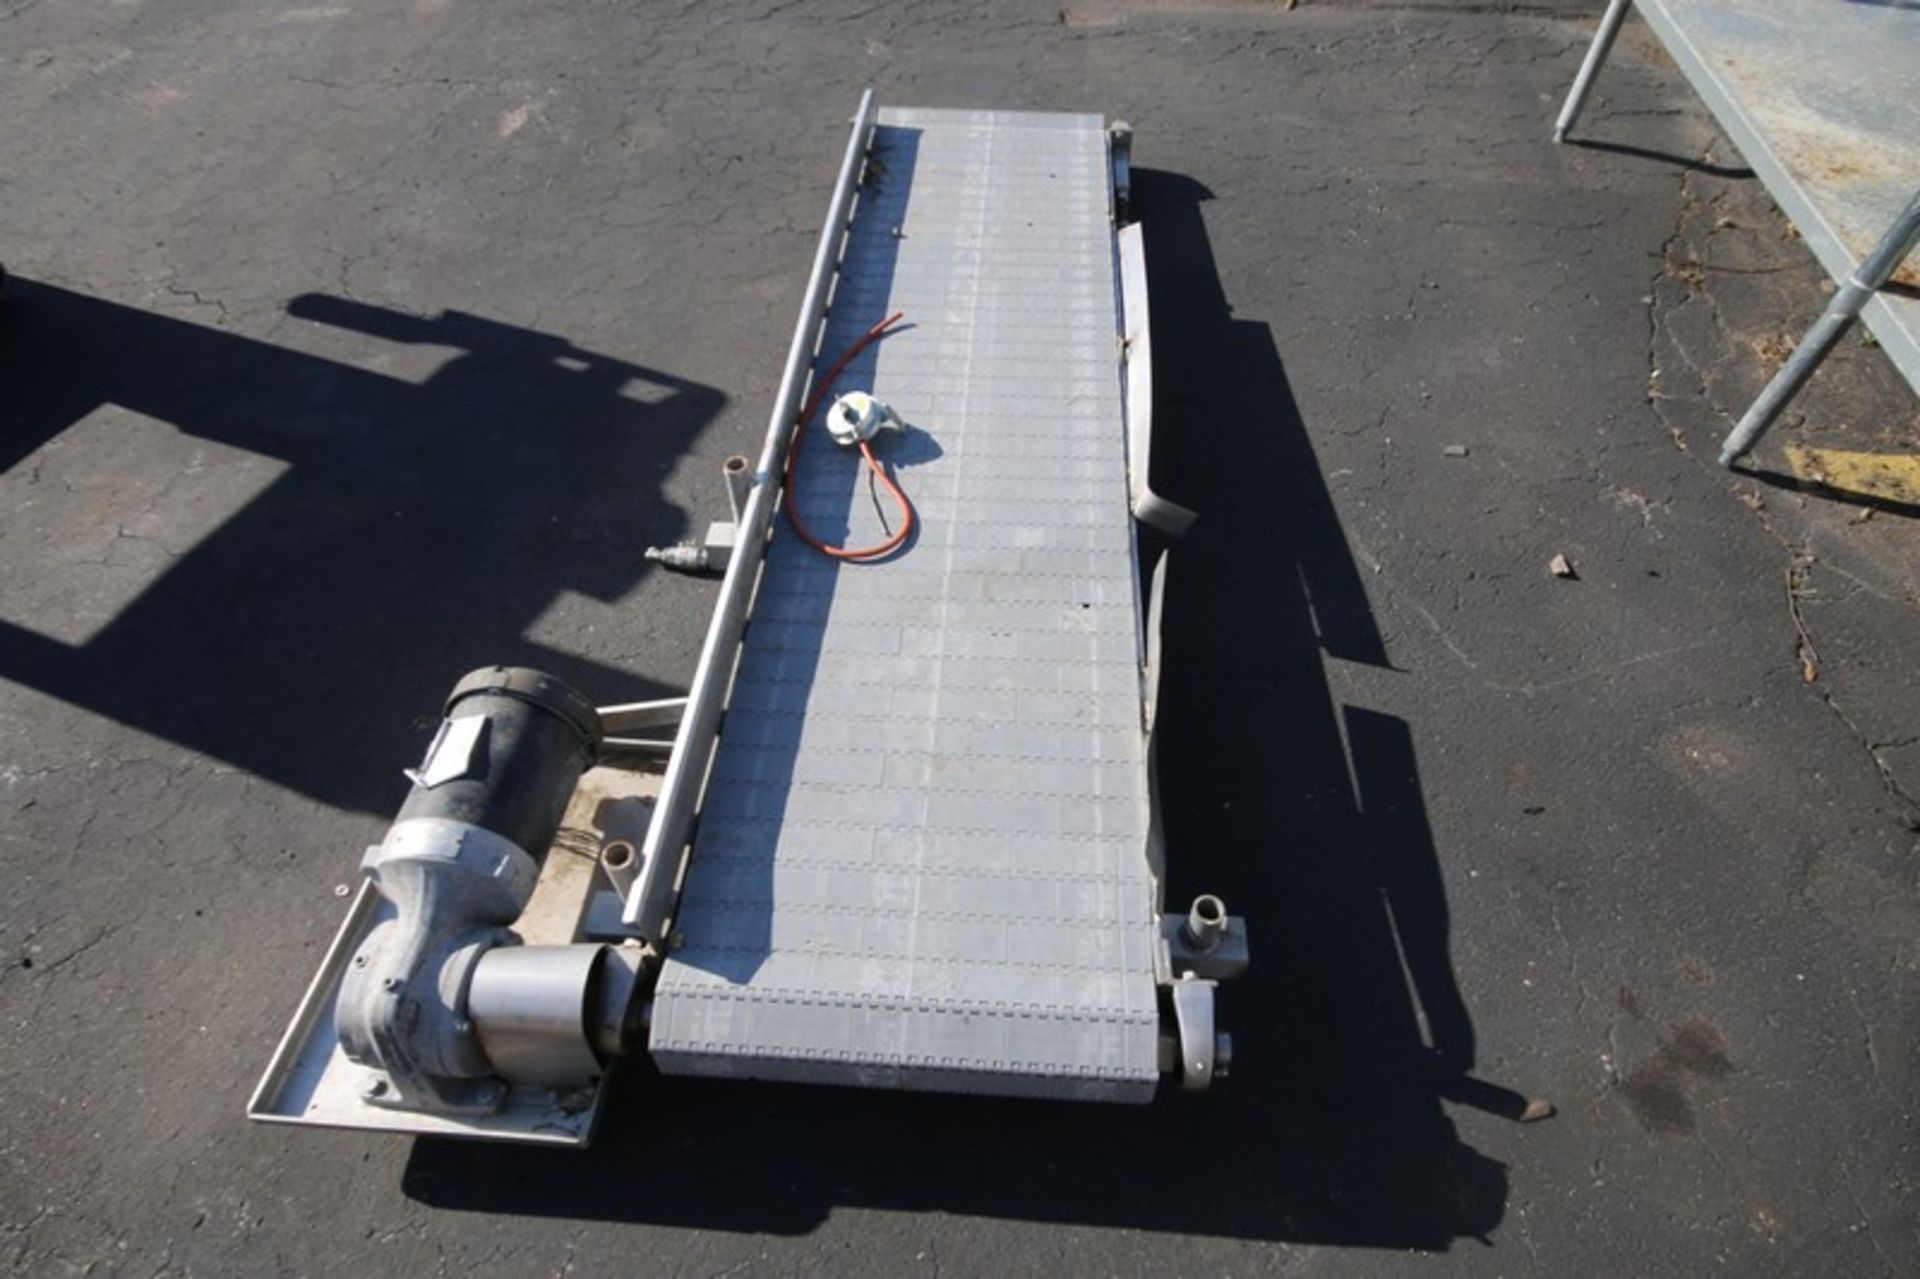 7' L S/S Power Belt Conveyor Section with 20" W Rex Type Plastic Belt, 1 hp / 1755 rpm Drive - Image 2 of 3